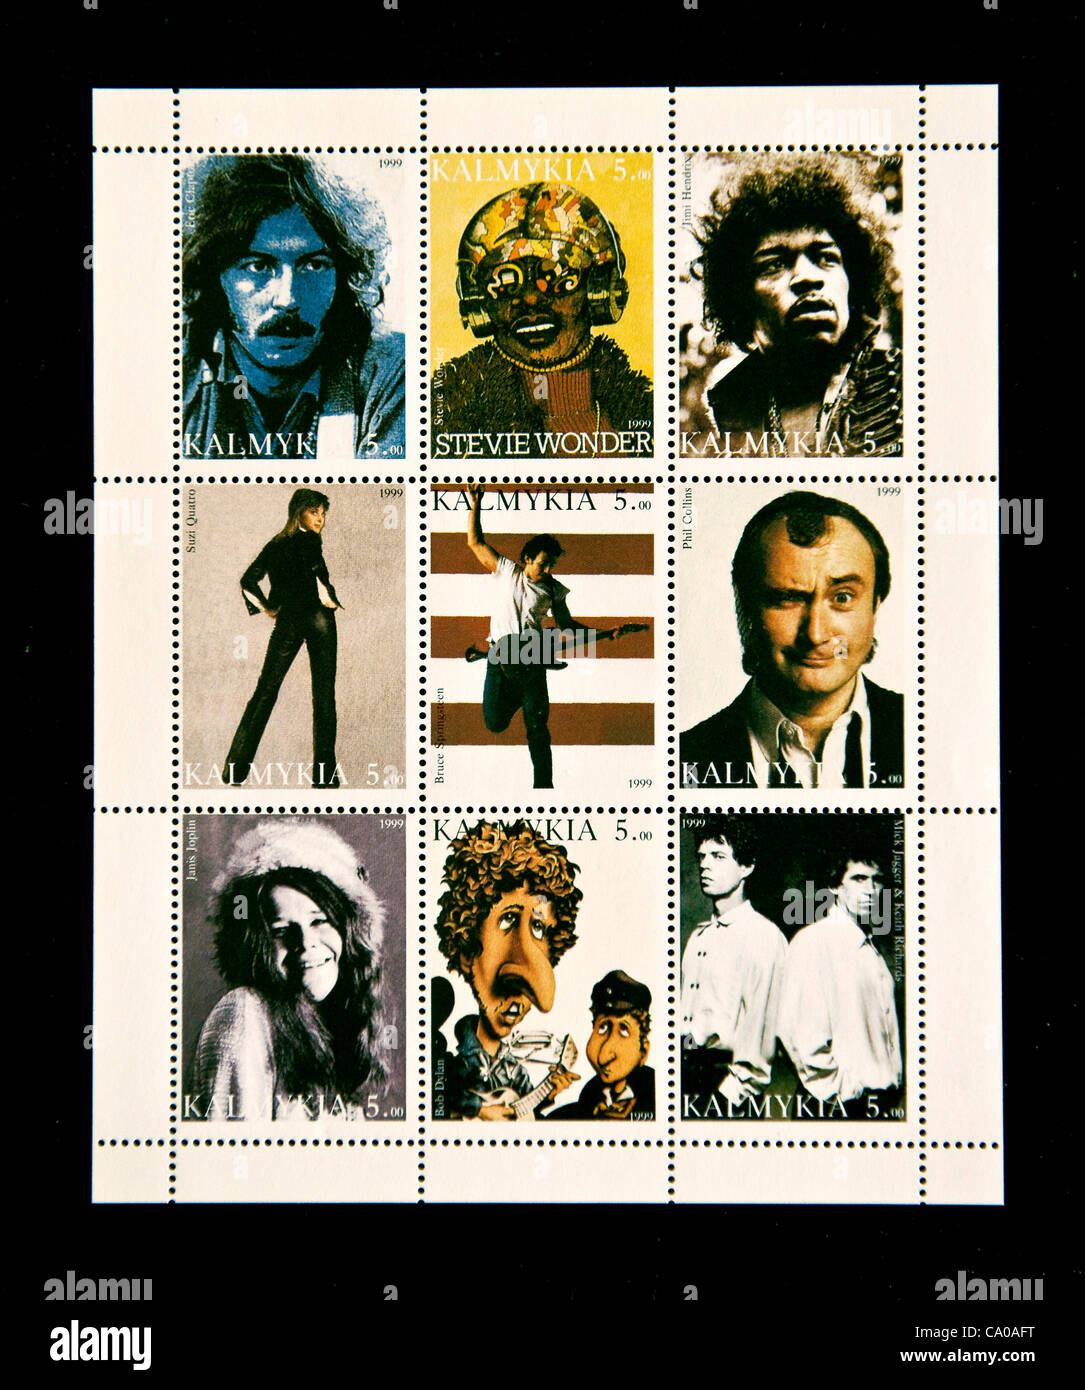 March 12, 2012 - West Long Branch, NJ, USA -  A series of stamps from the Republic of Kalmykia, including one of Bruce Springsteen, one of the approximately 15,000 items which comprise the Bruce Springsteen Special Collection housed on the campus of Monmouth University Stock Photo